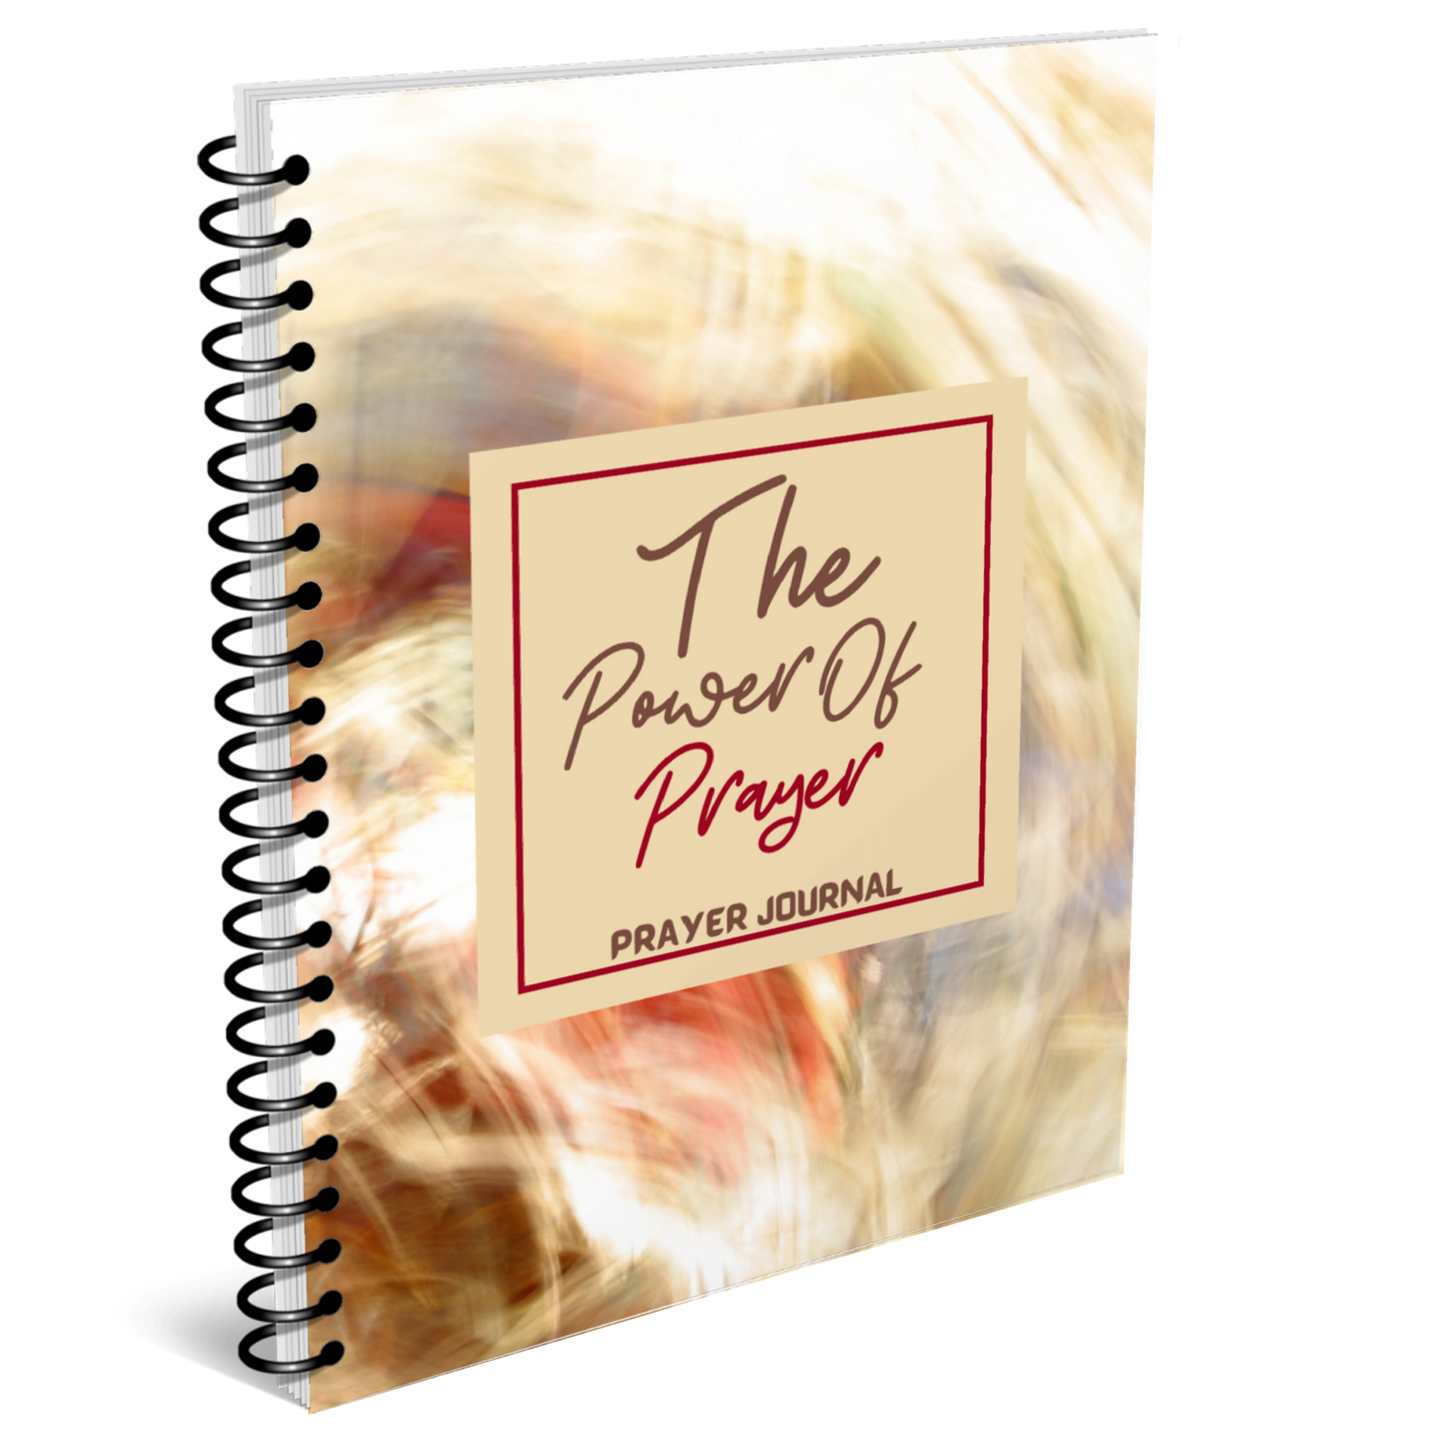 The Power Of Prayer Prayer Journal for KDP Amazon & The Book Patch